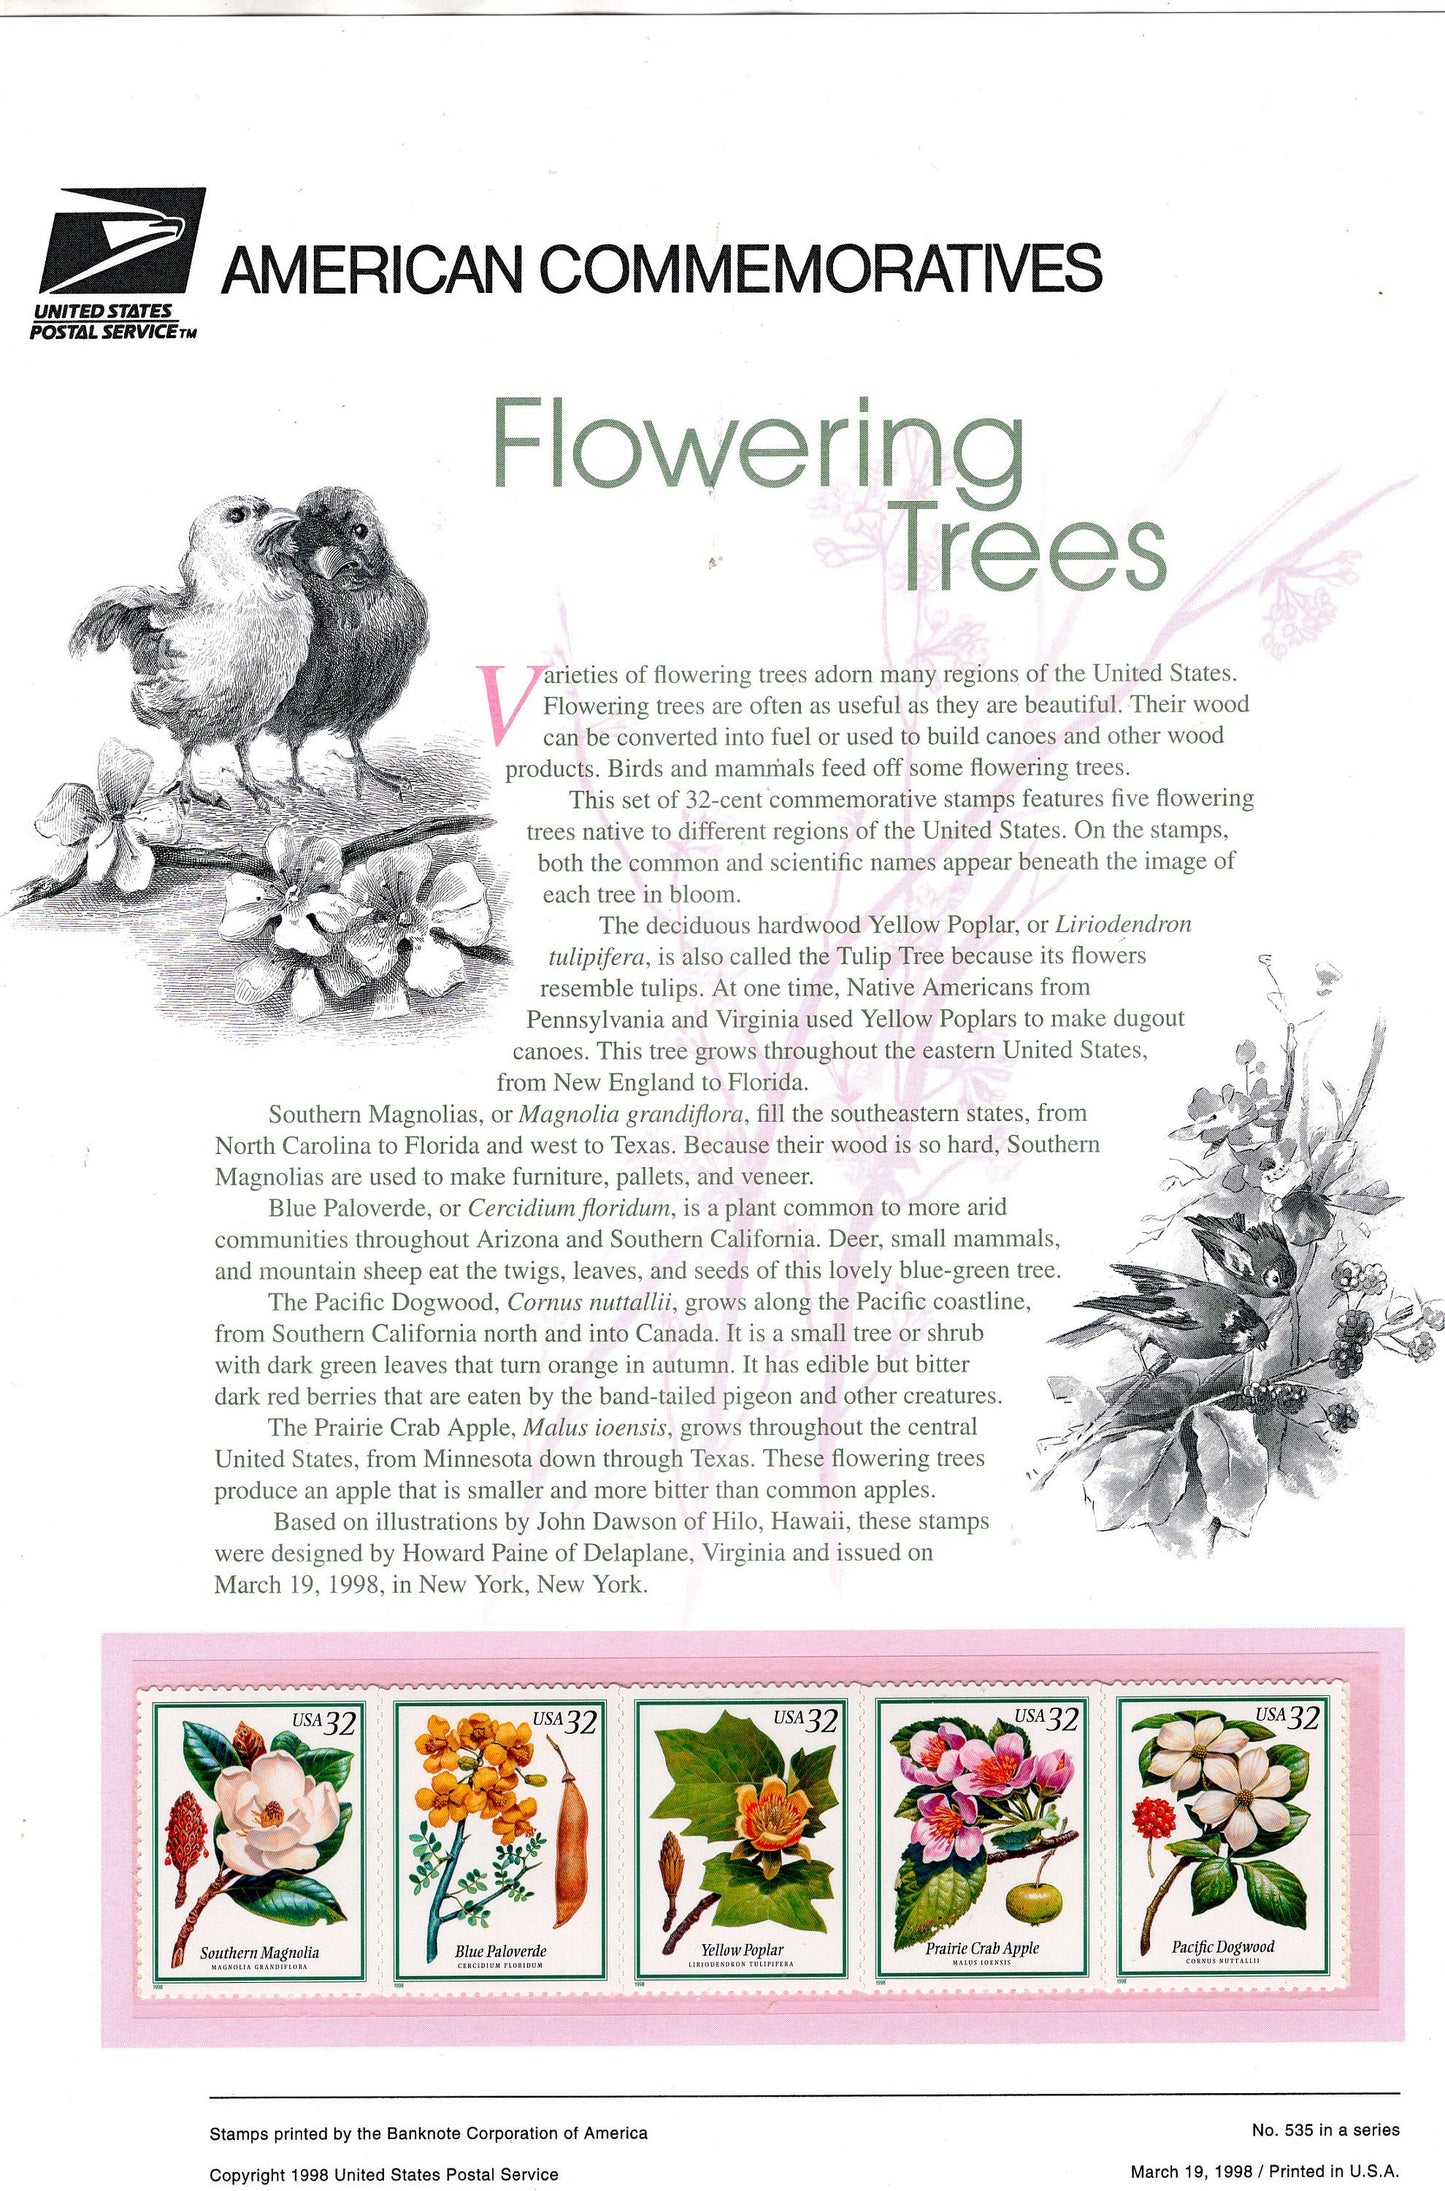 FLOWERING TREES STRIP of 5 Special Commemorative Panel with Actual Stamps + Illustrations, Text Great Gift 8.5x11 '93 -